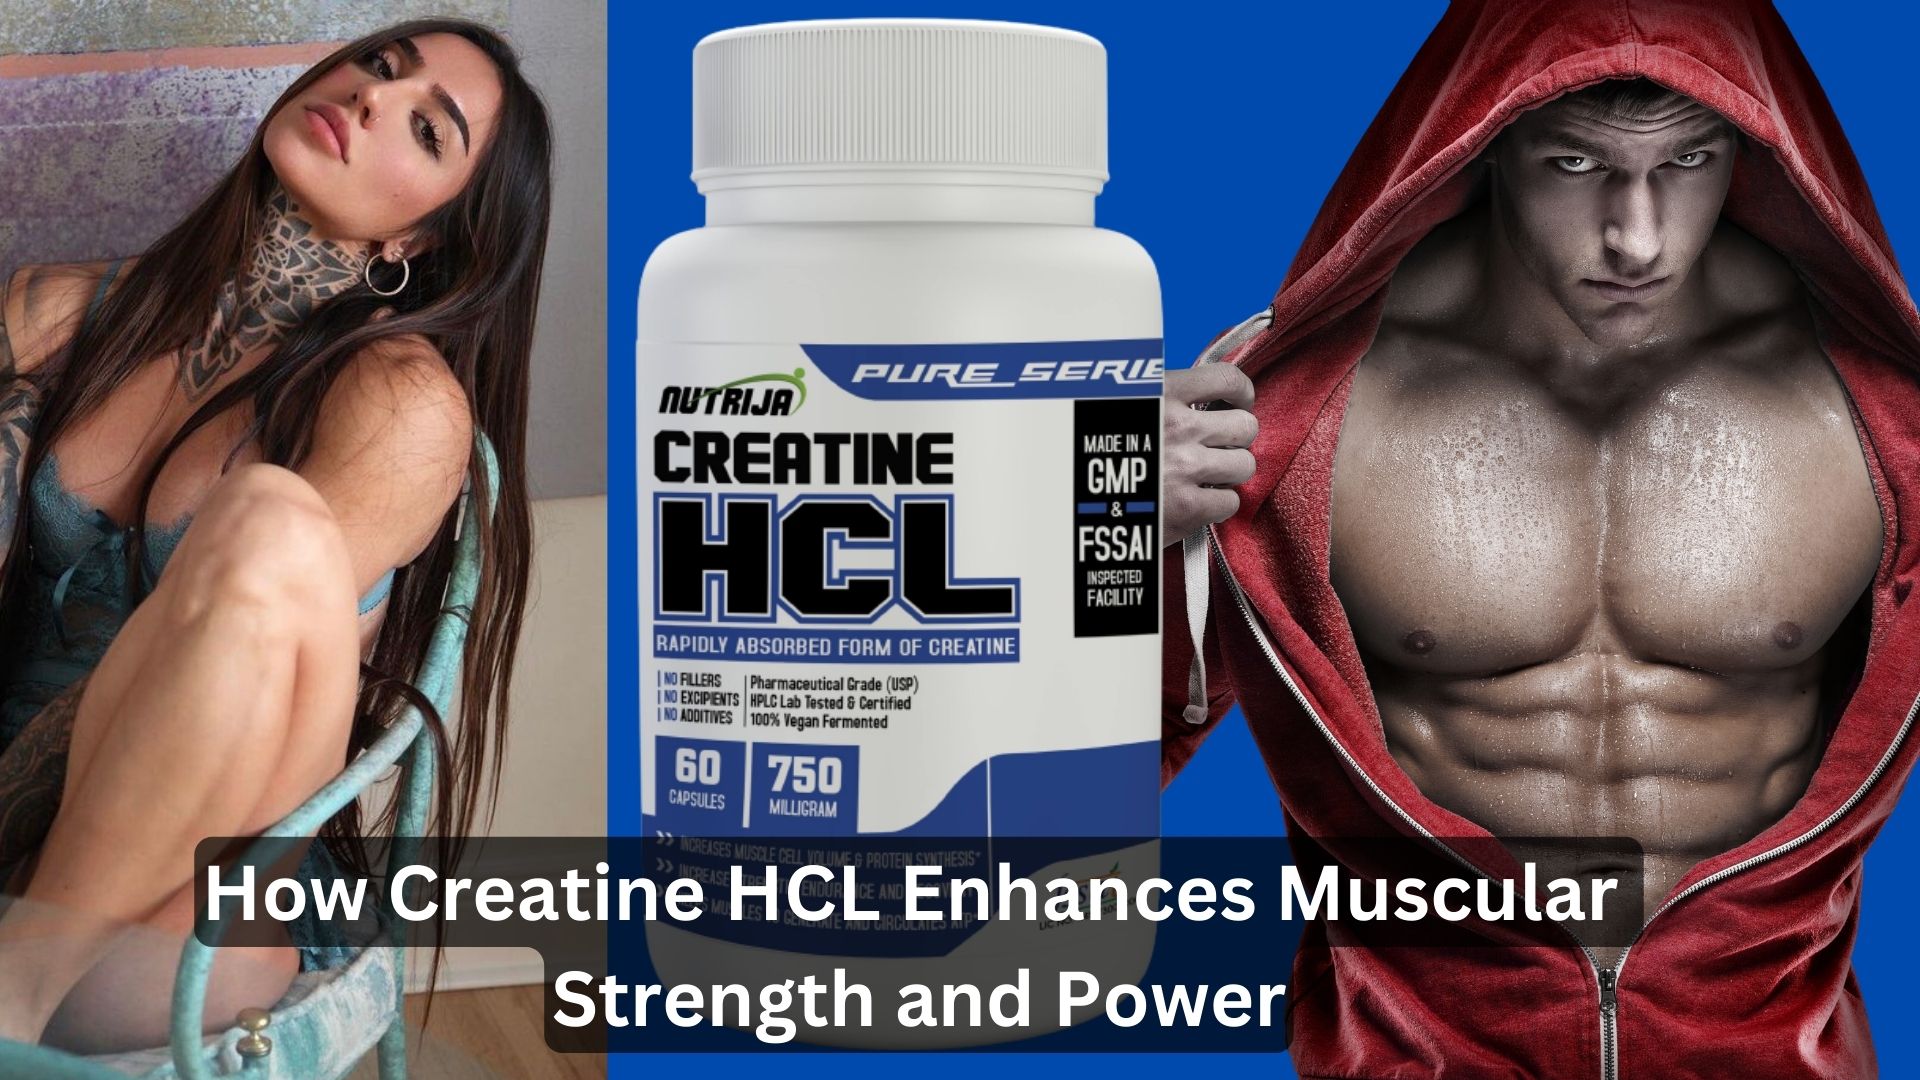 You are currently viewing Pushing Limits:How Creatine HCL Enhances Muscular Strength & Power